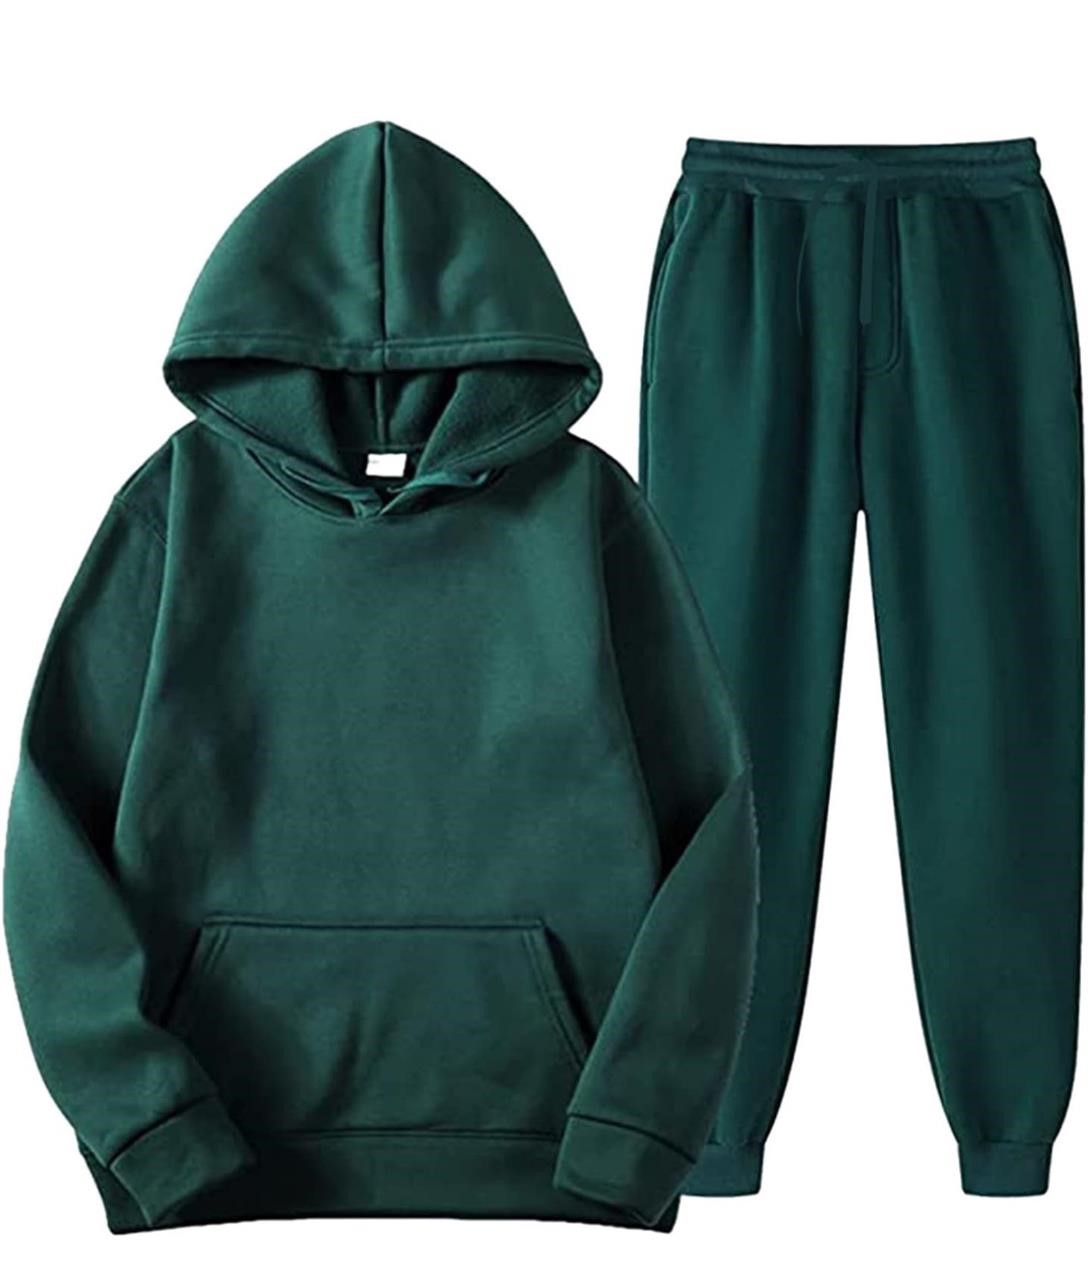 ($59) Baggy Tracksuits for Men Long Sleeve,M